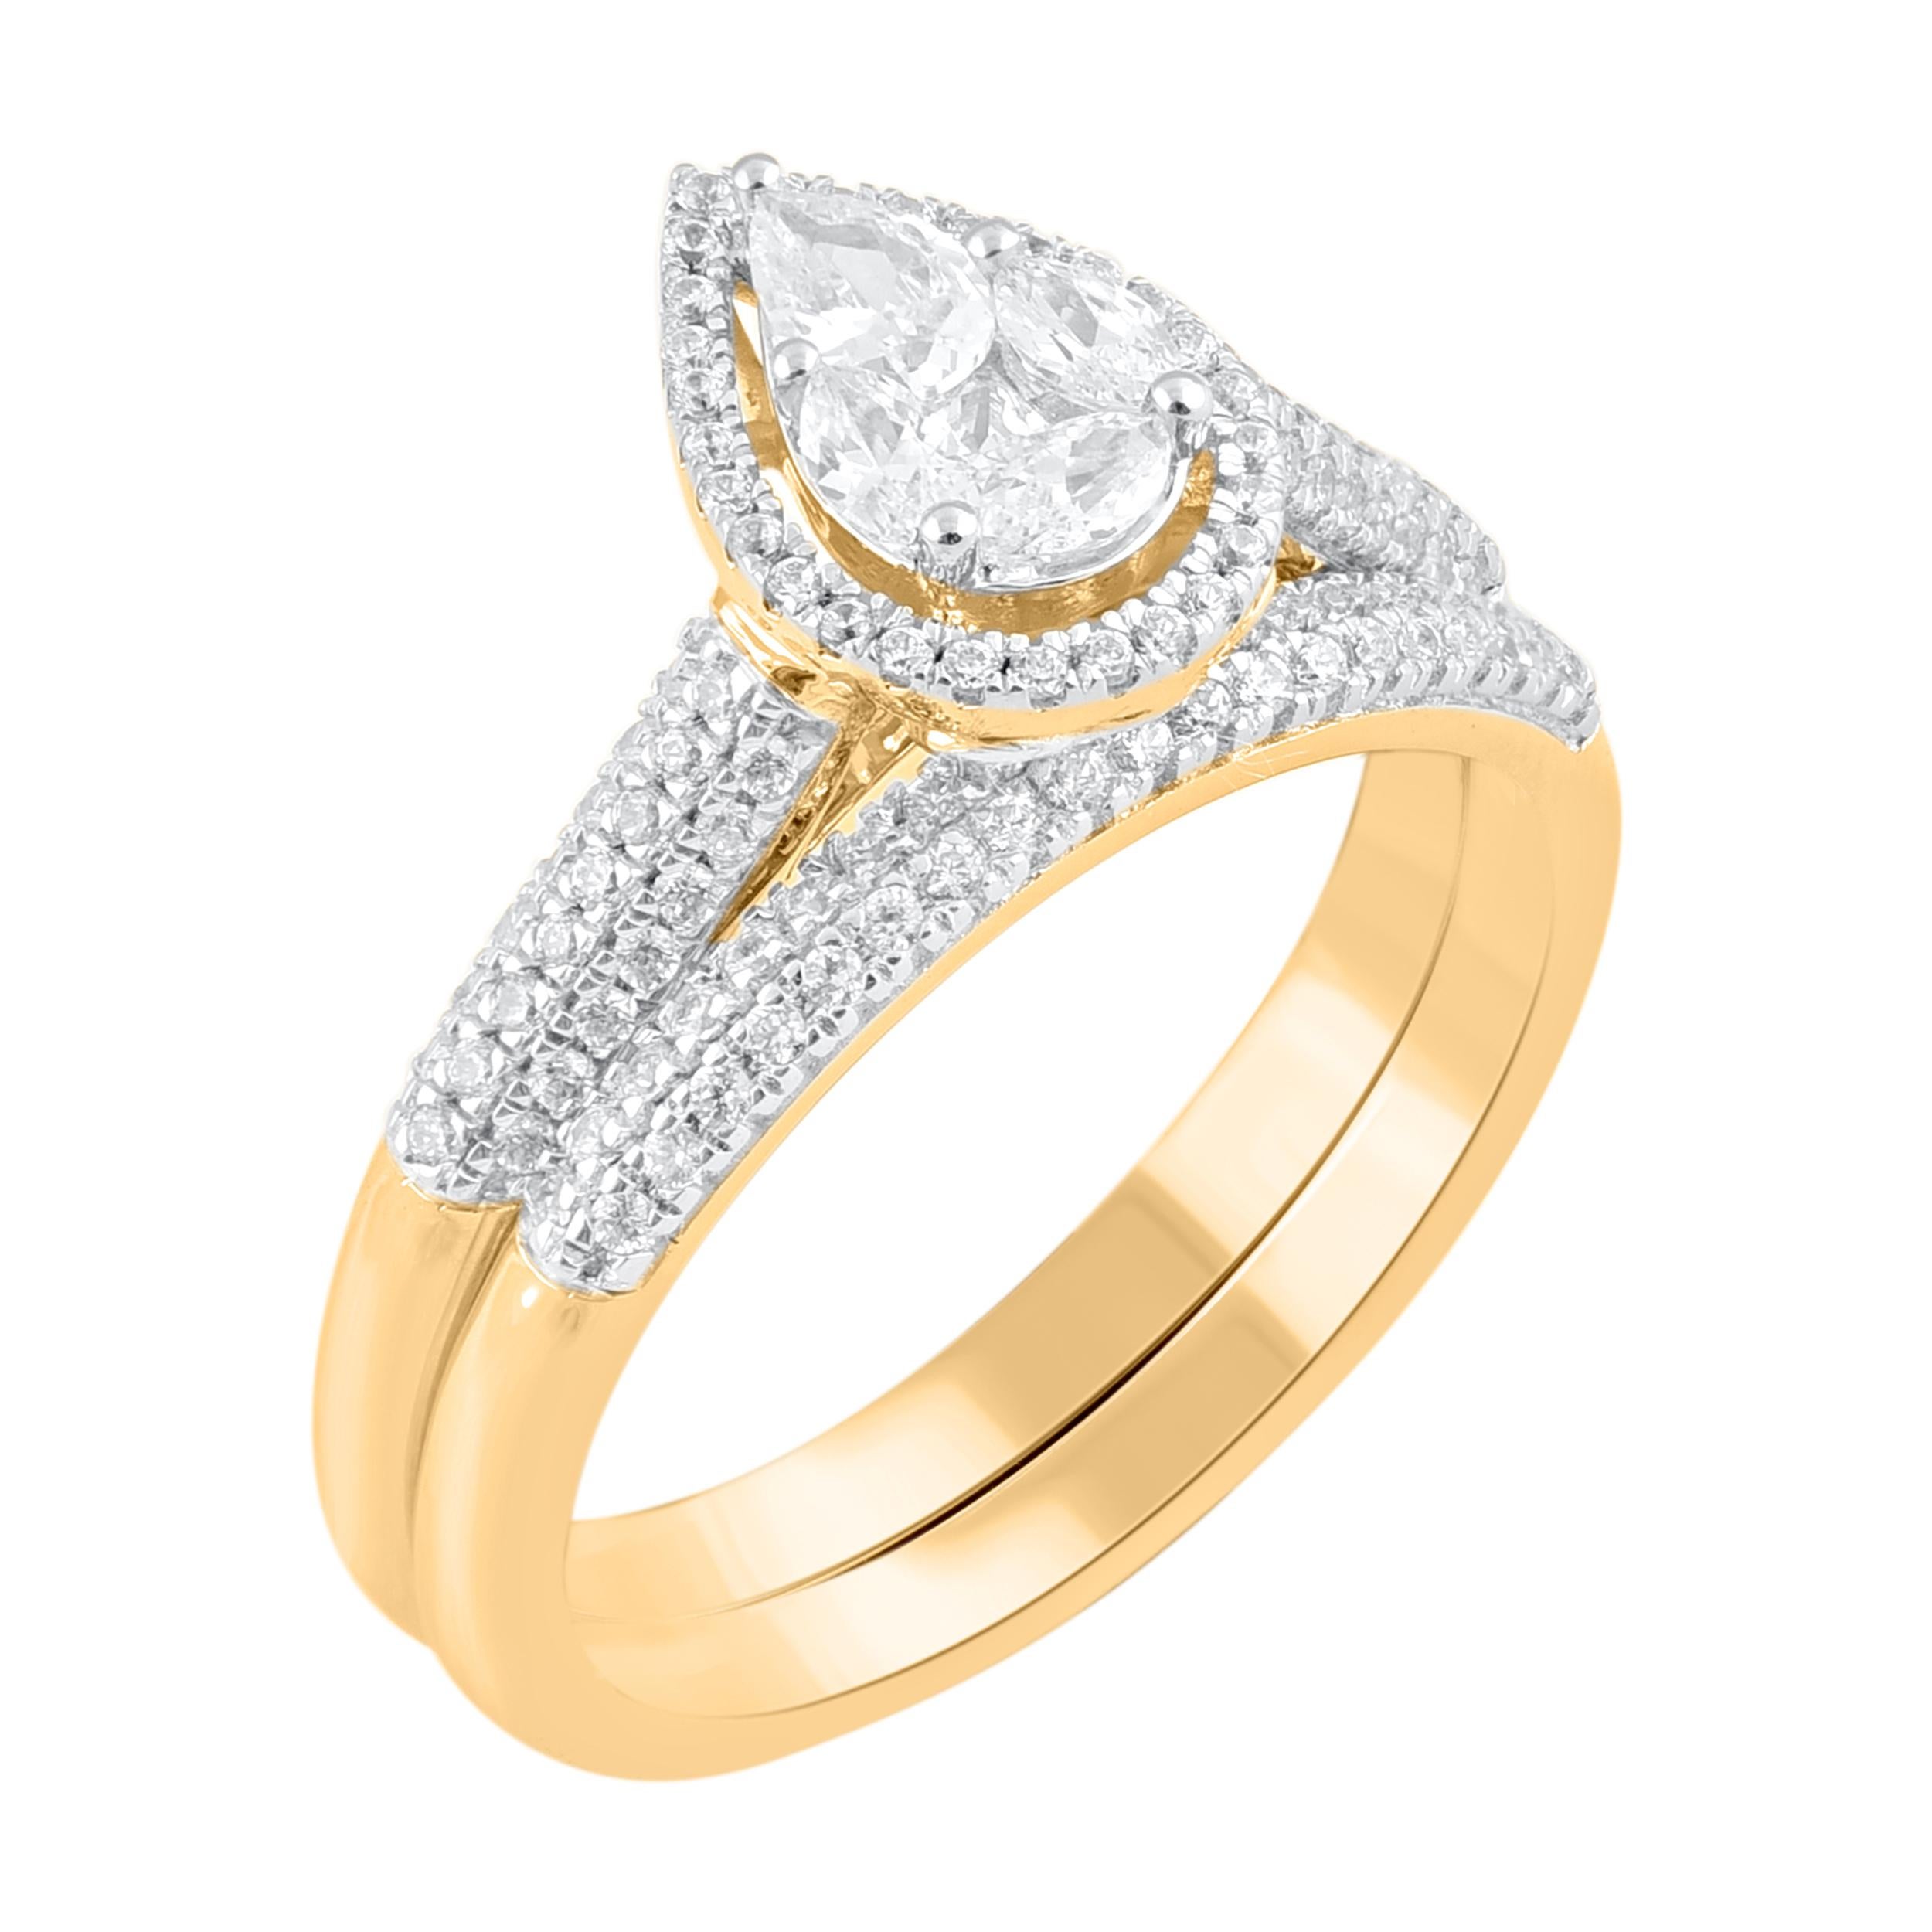 Make that special moment magical with the exquisite diamond bridal ring set. This classic bridal ring is studded with single cut, princess cut, pear & marquise cut 116 diamonds in pressure and prong setting. This ring is designed in 14-karat yellow